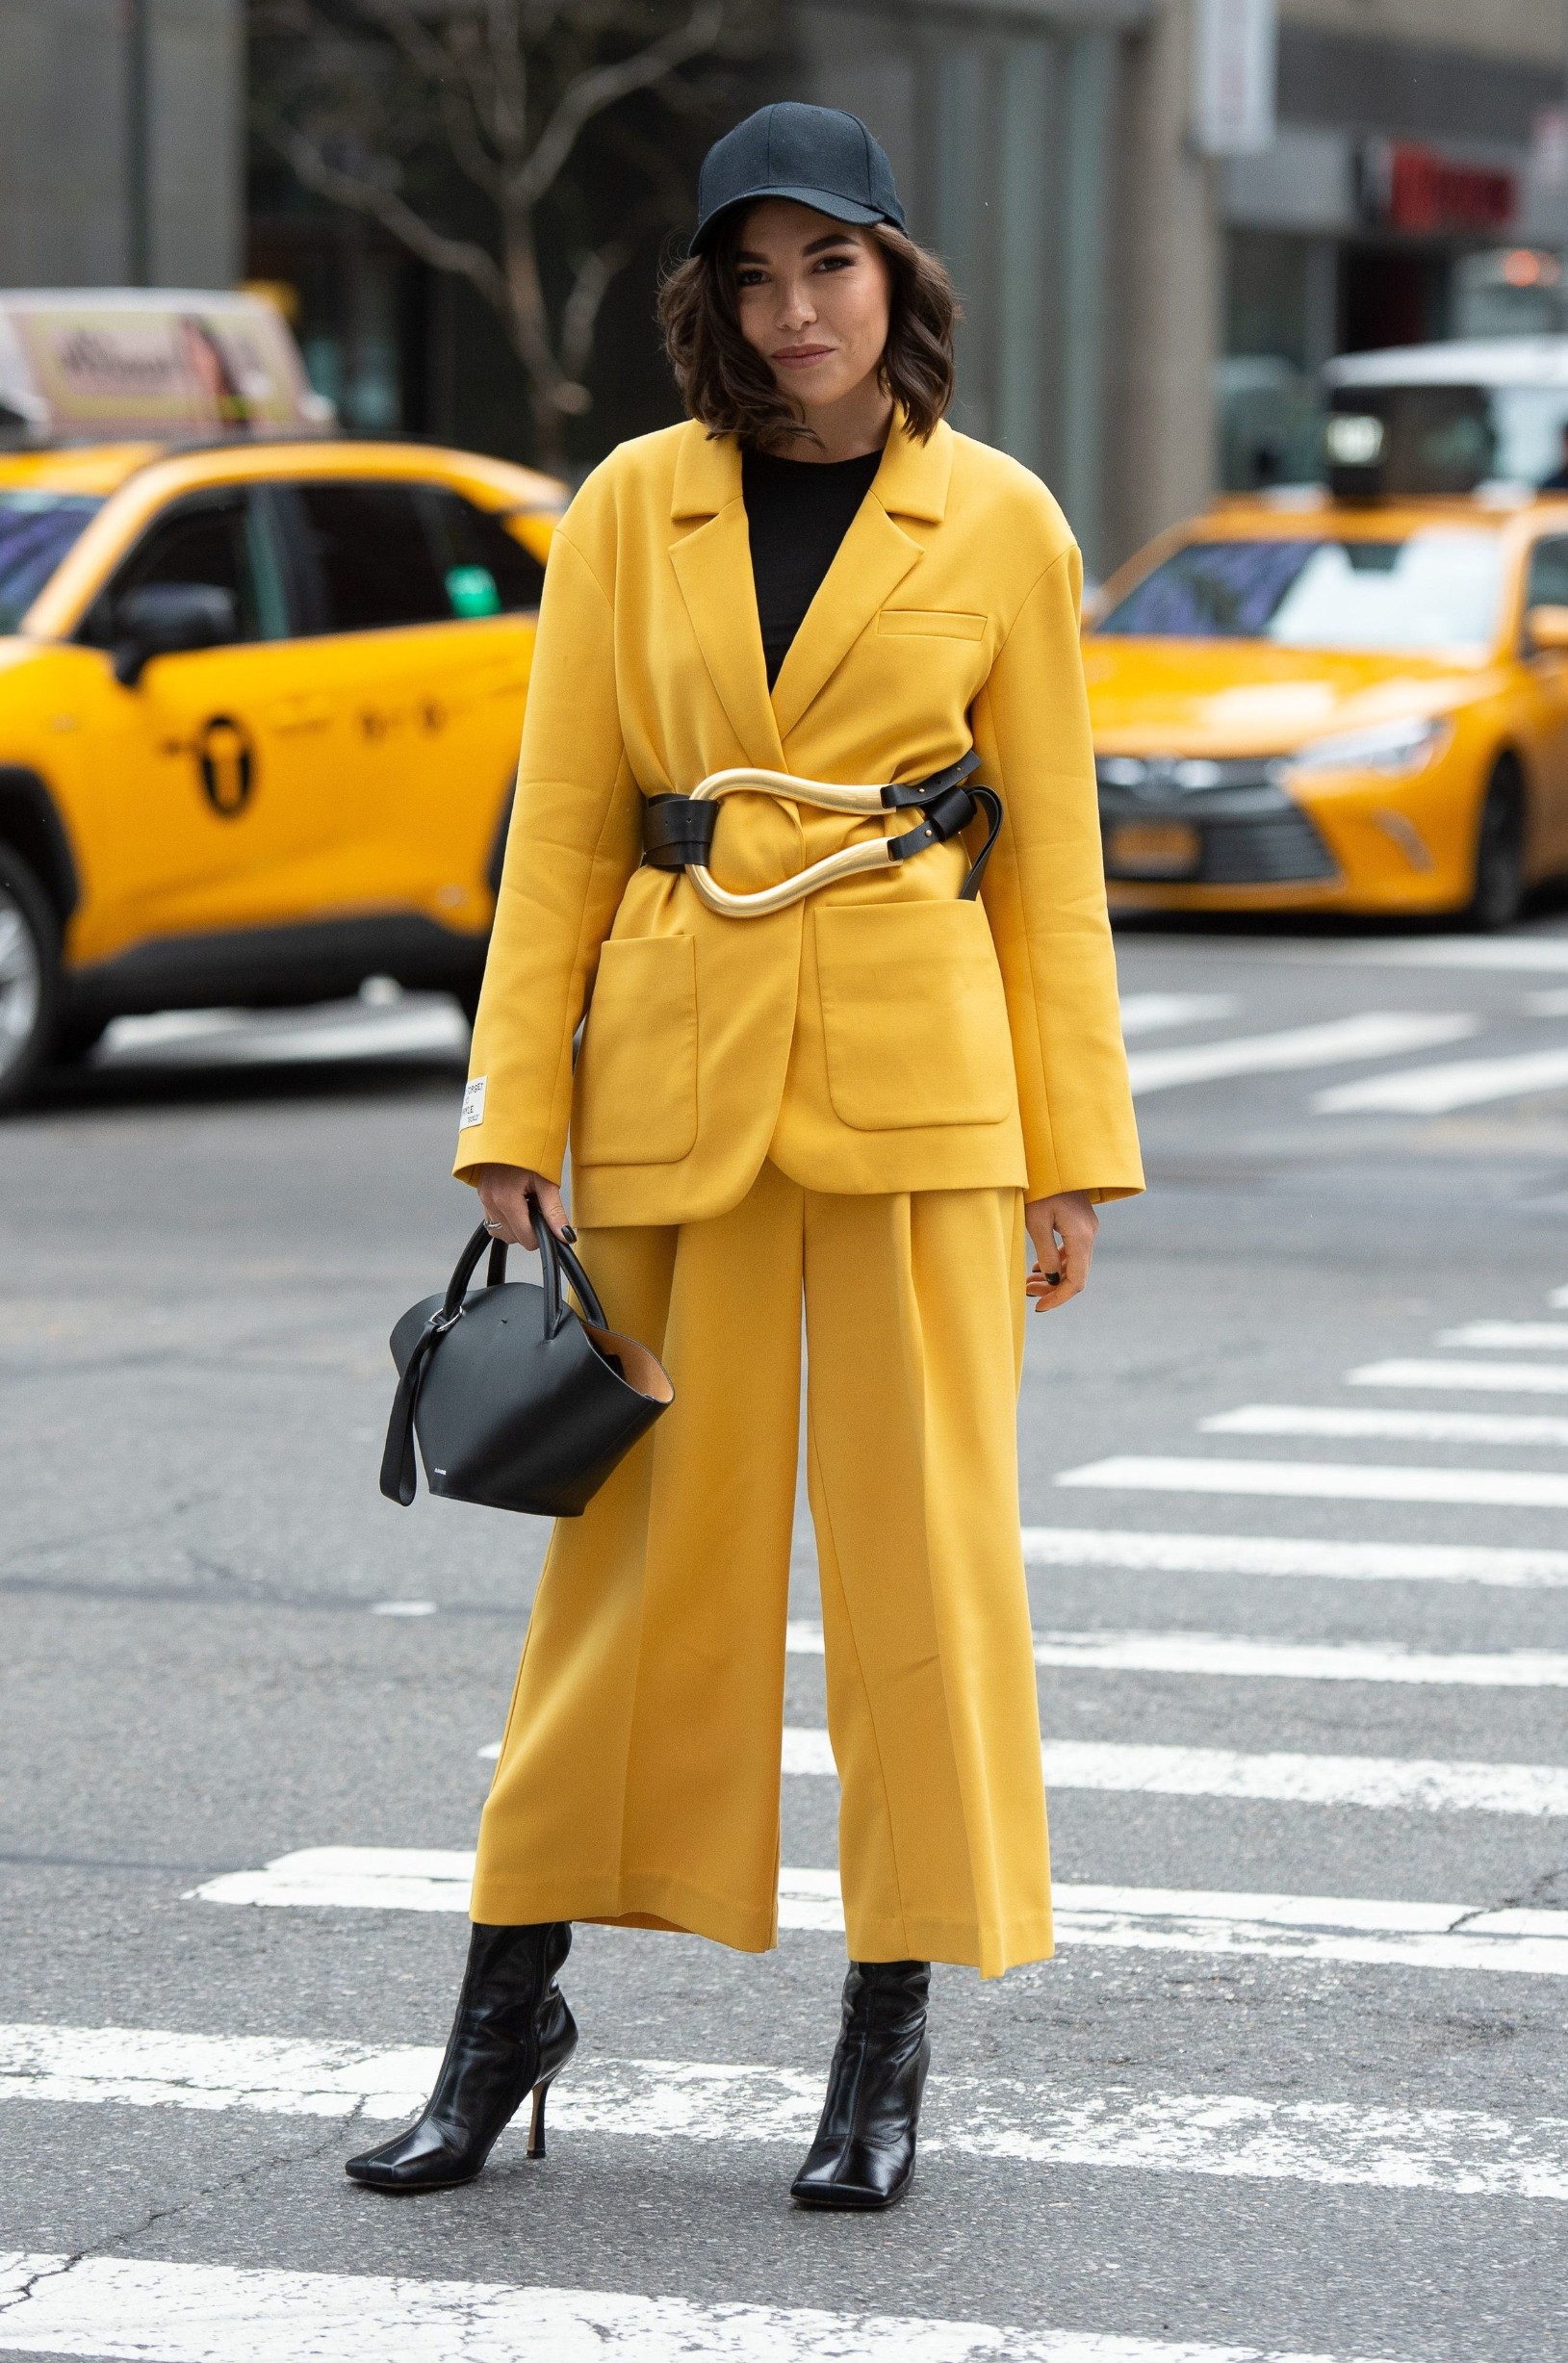 Street Style
Street Style, Fall Winter 2020, New York Fashion Week, USA - 10 Feb 2020, Image: 497760710, License: Rights-managed, Restrictions: , Model Release: no, Credit line: ANDREW MORALES/WWD / Shutterstock Editorial / Profimedia